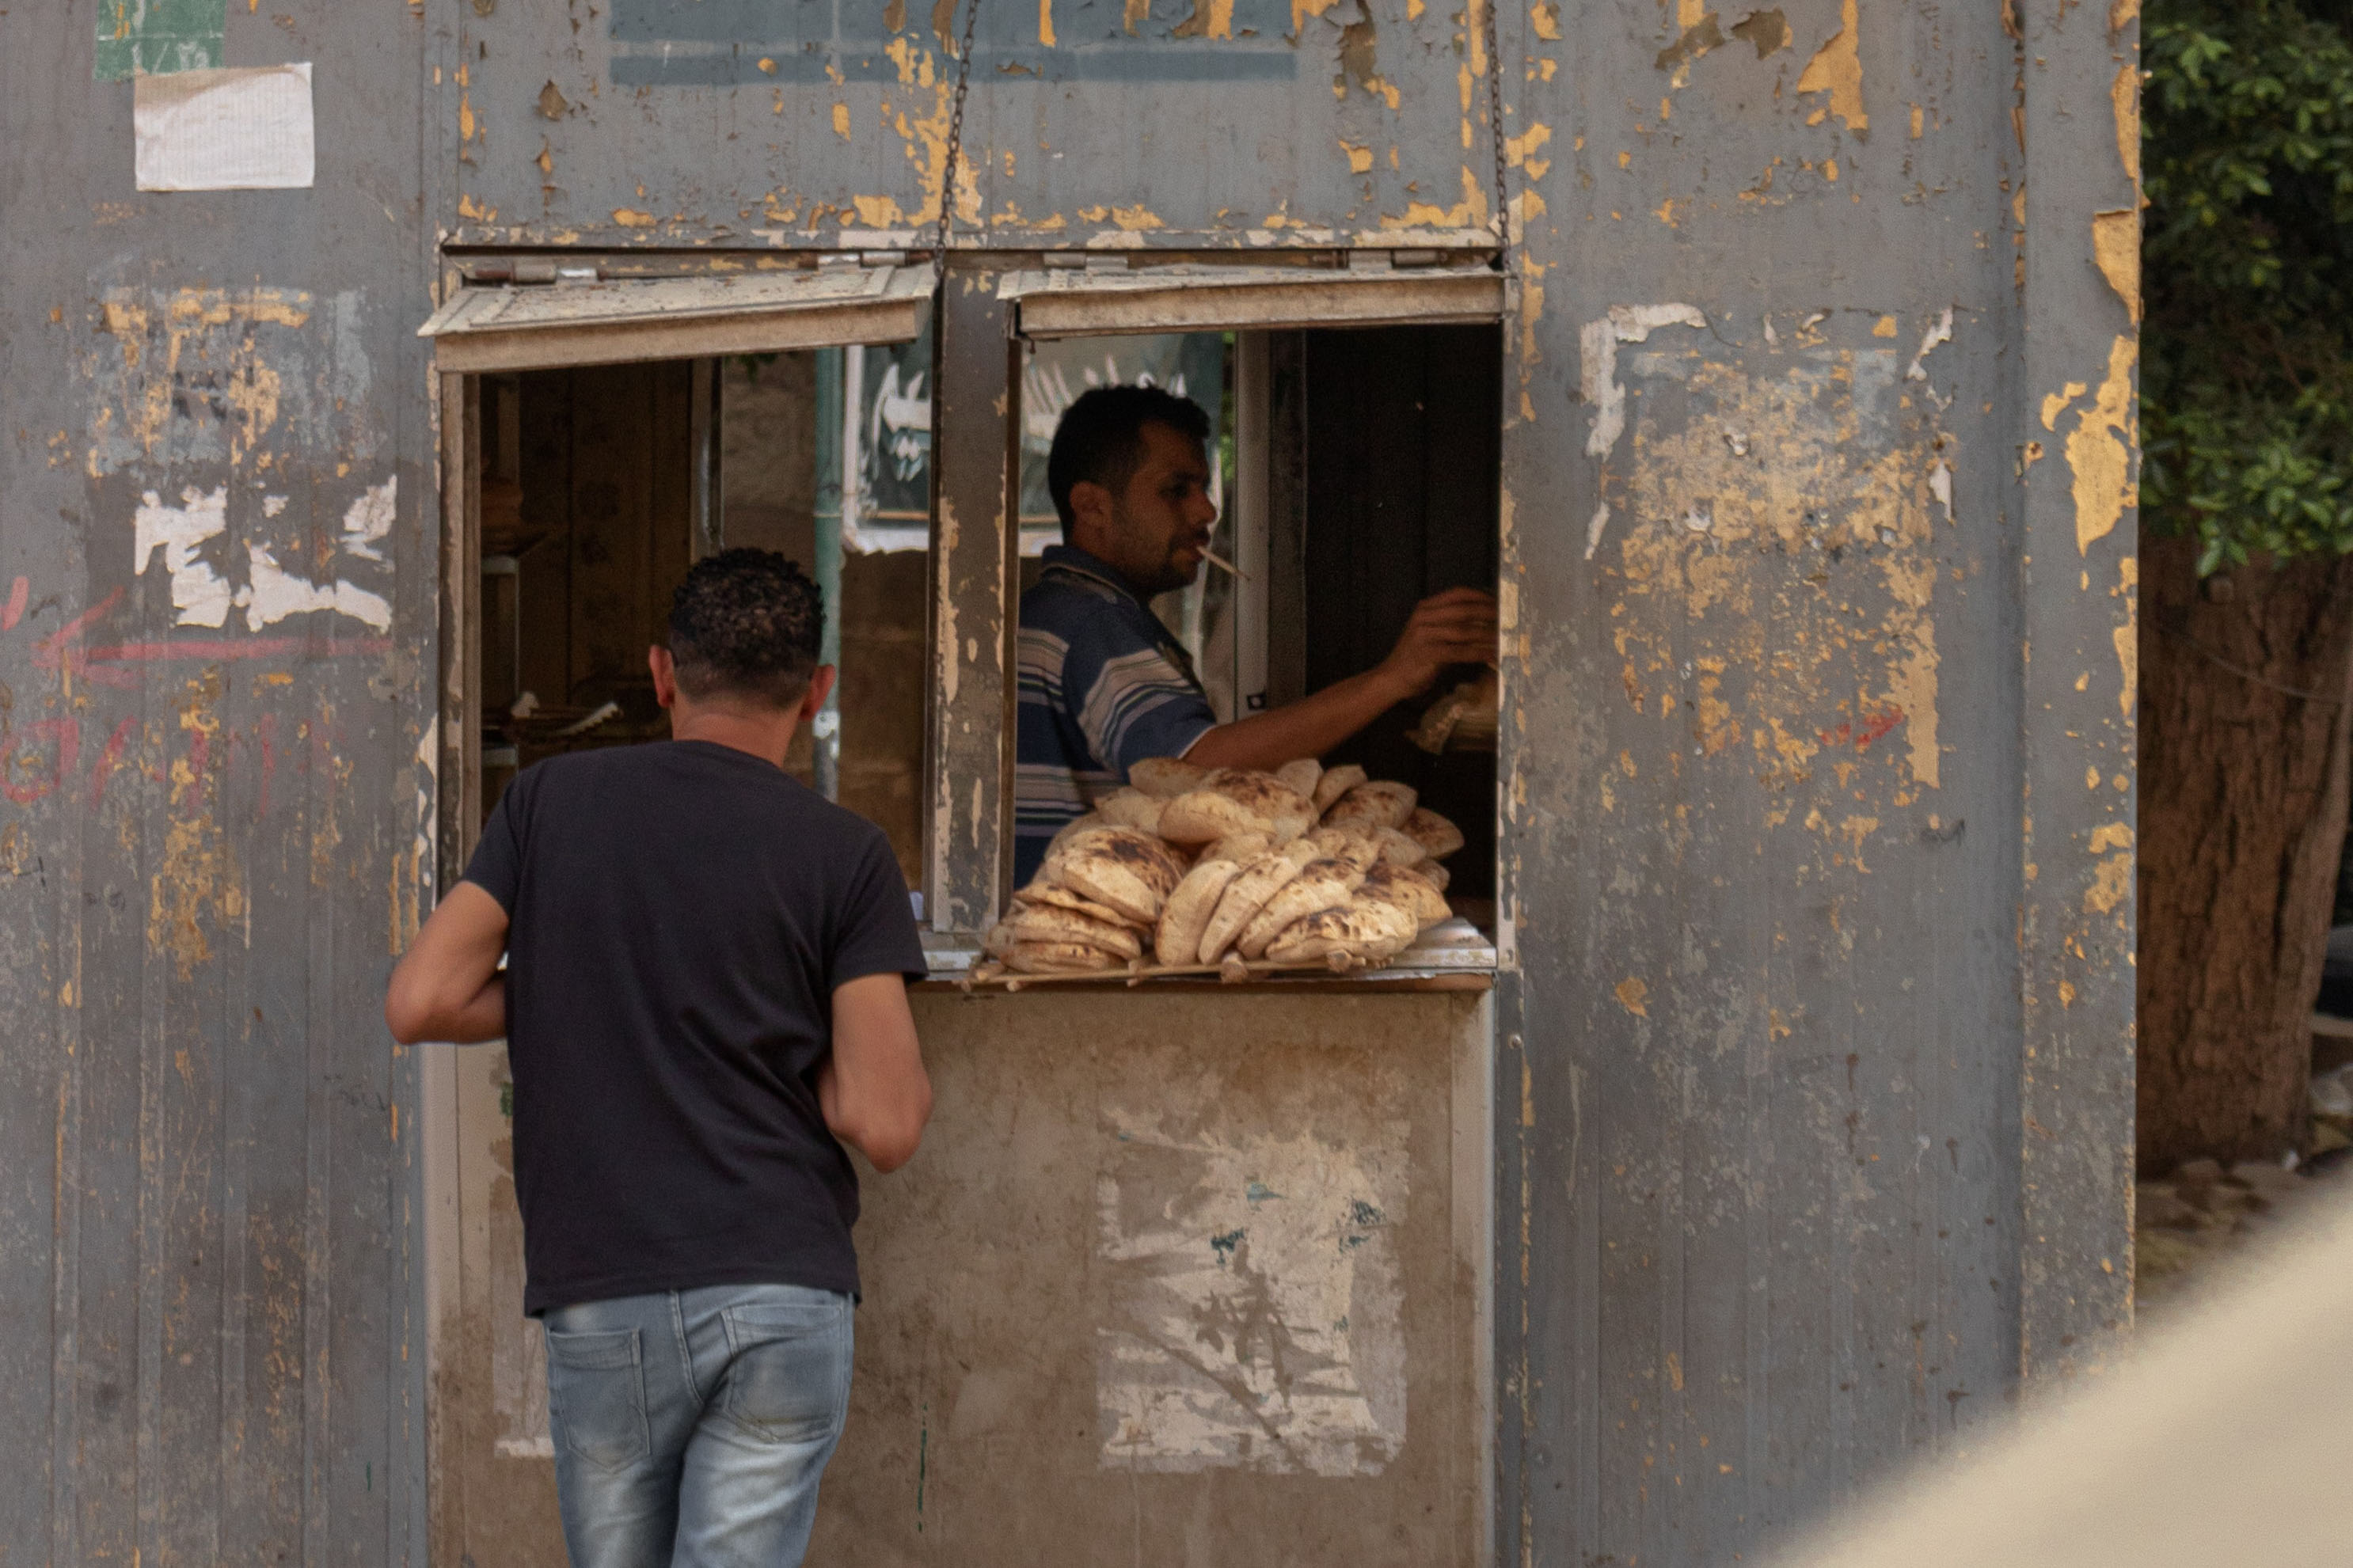 Man selling bread in Cairo, Egypt